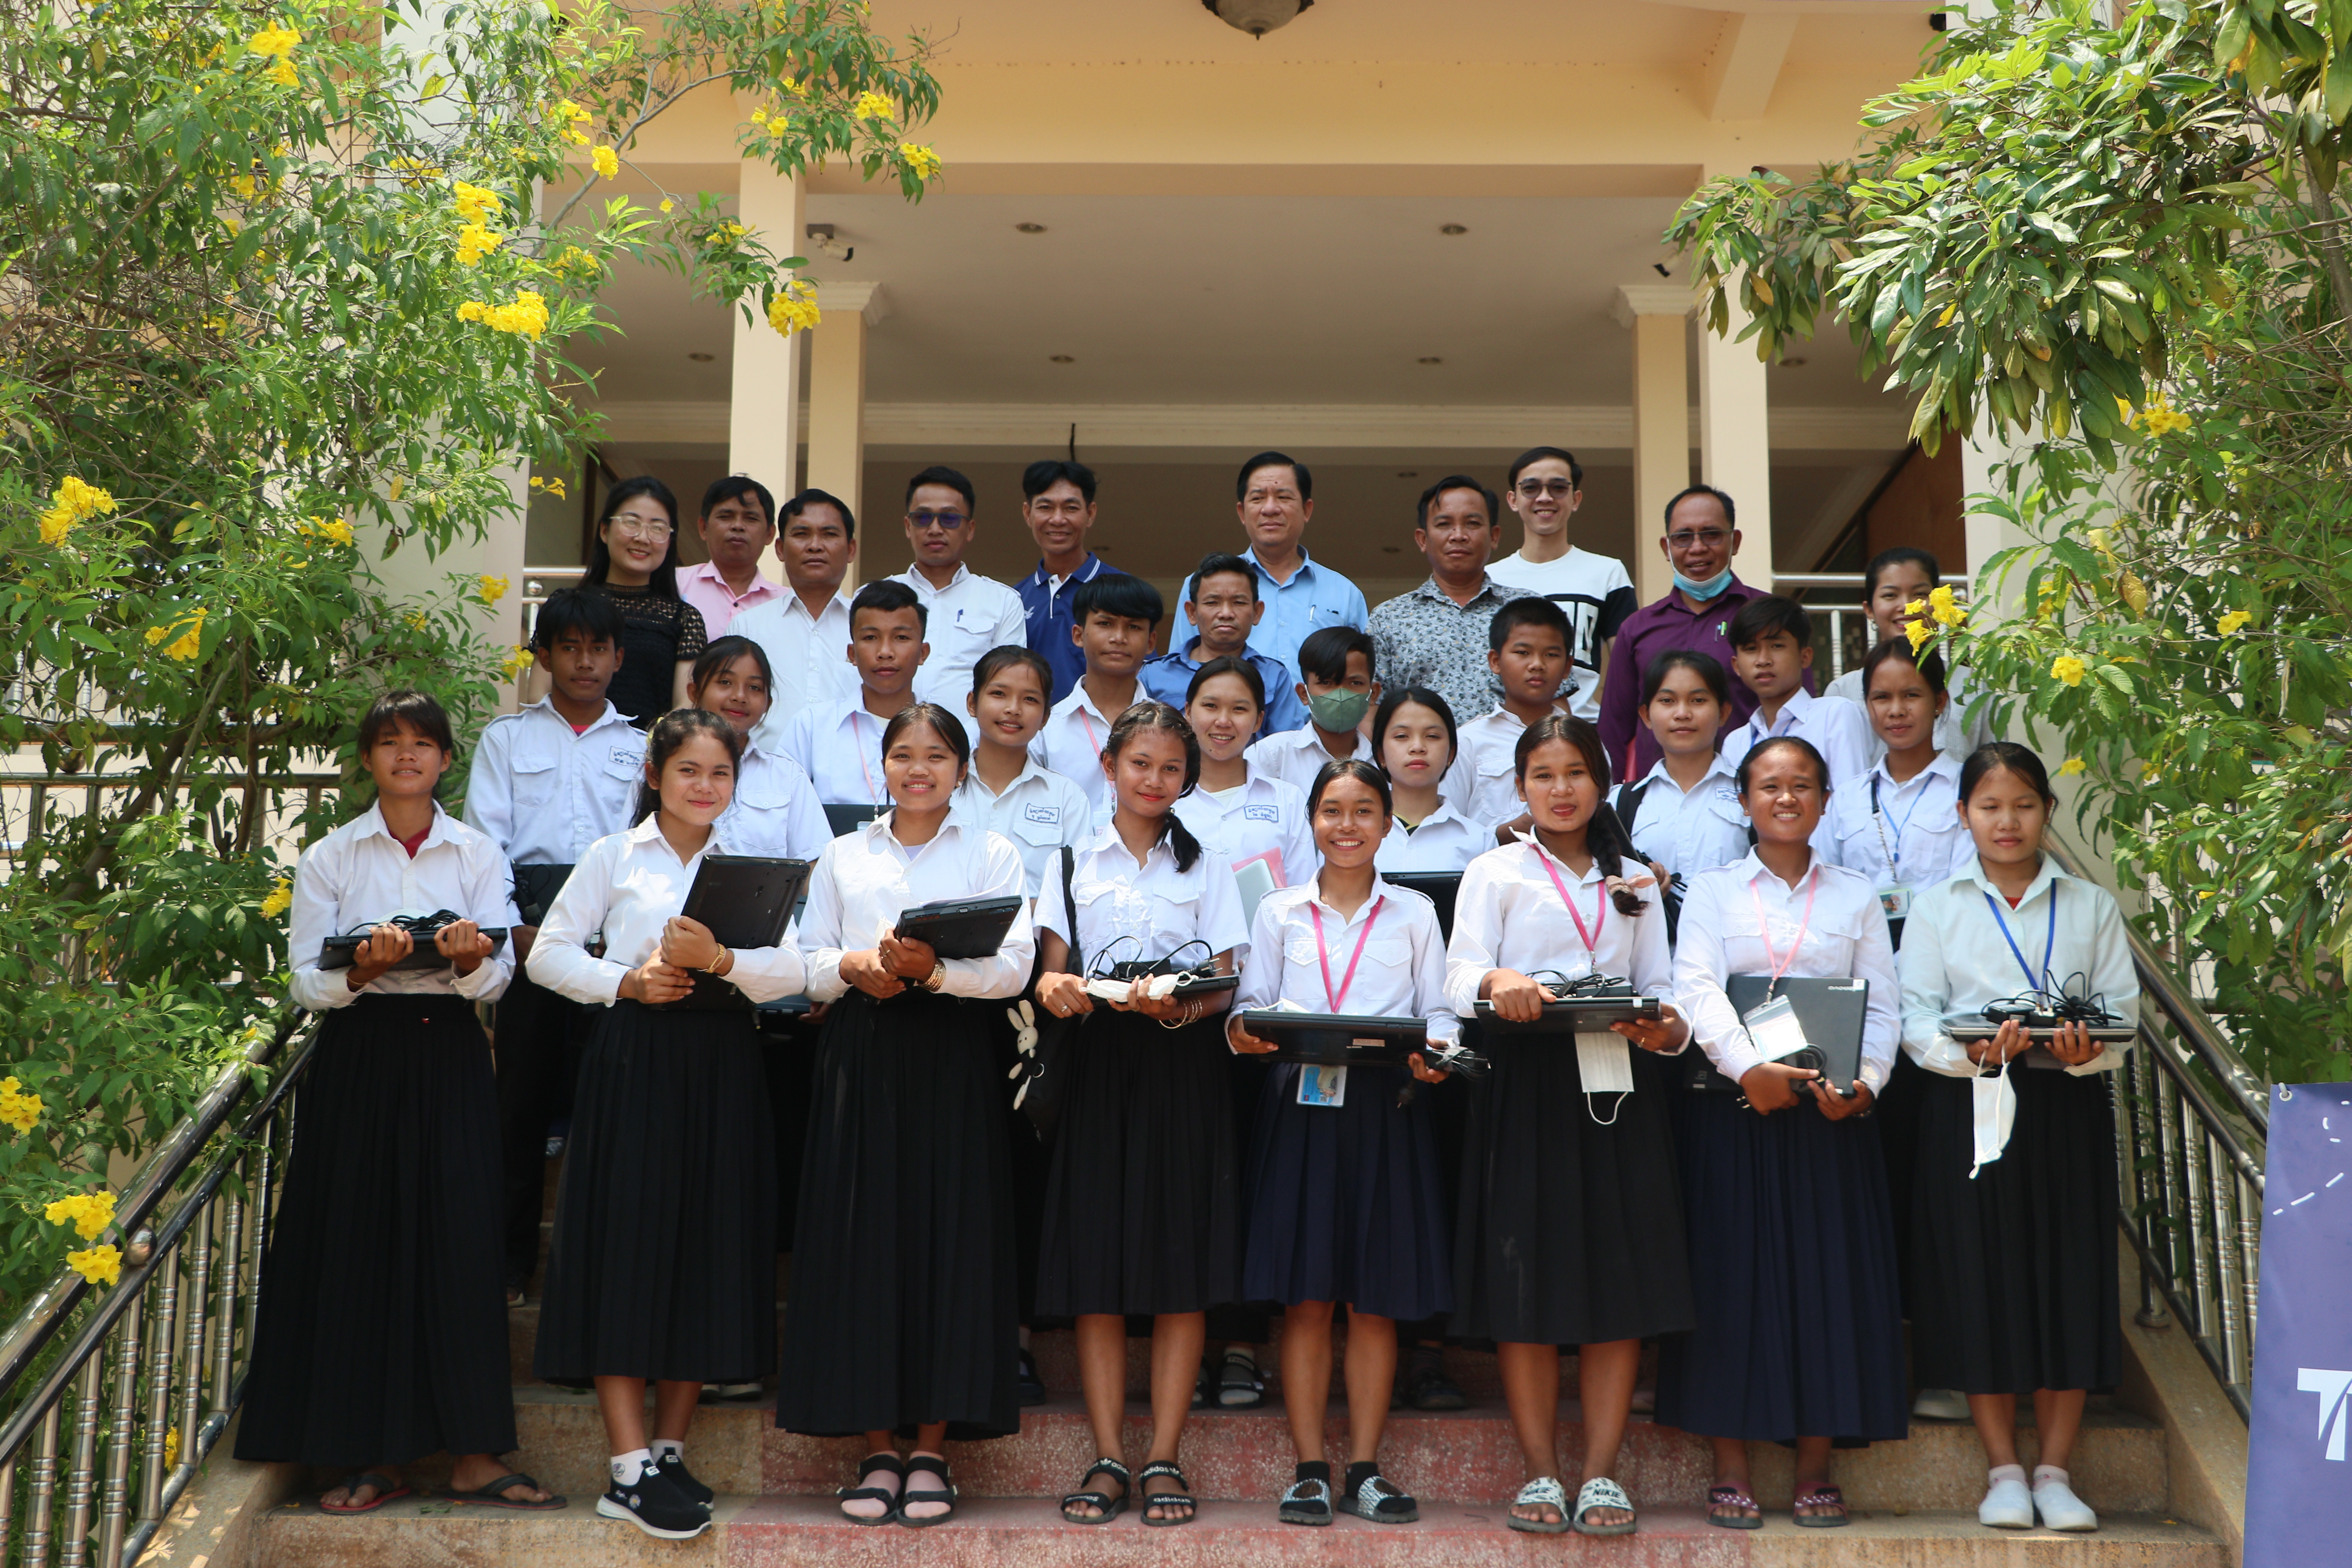 Students receiving their laptops and computers